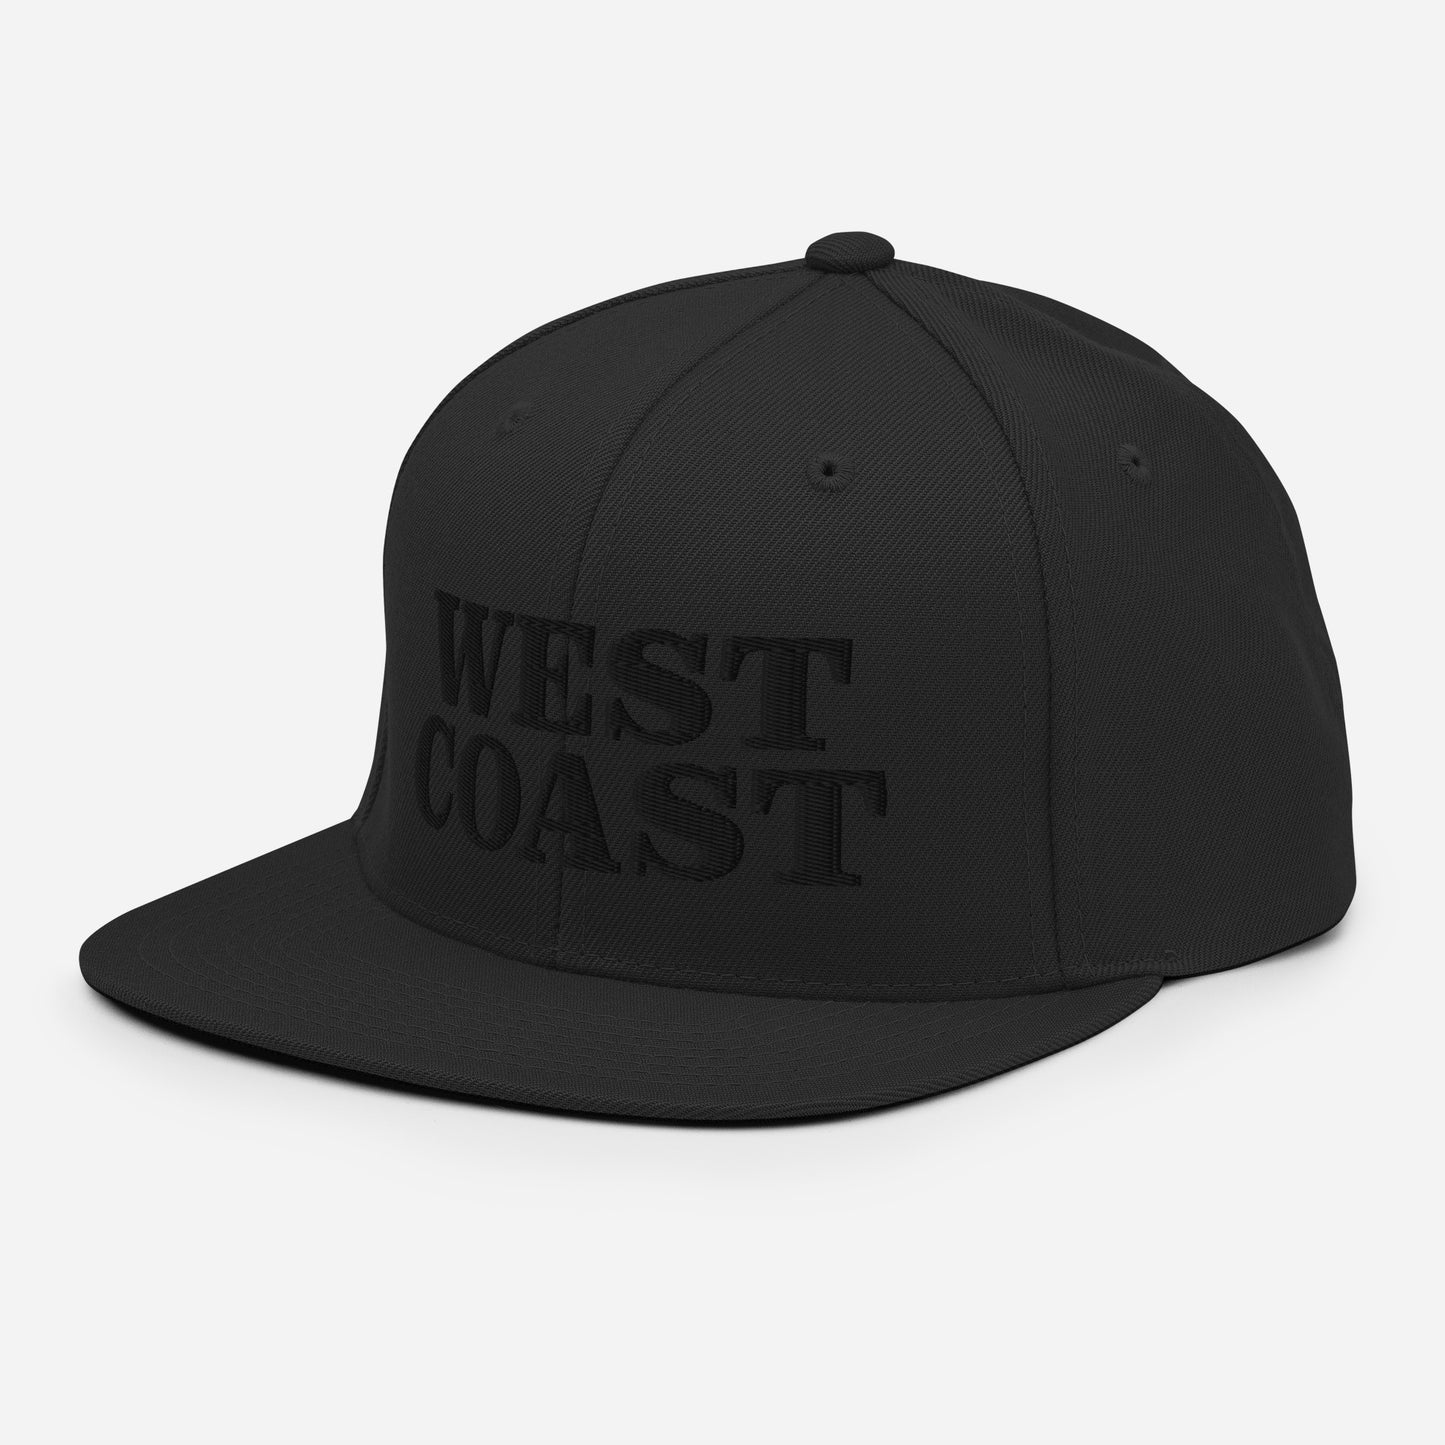 West Coast | Classic Snapback Hat | Embroidered